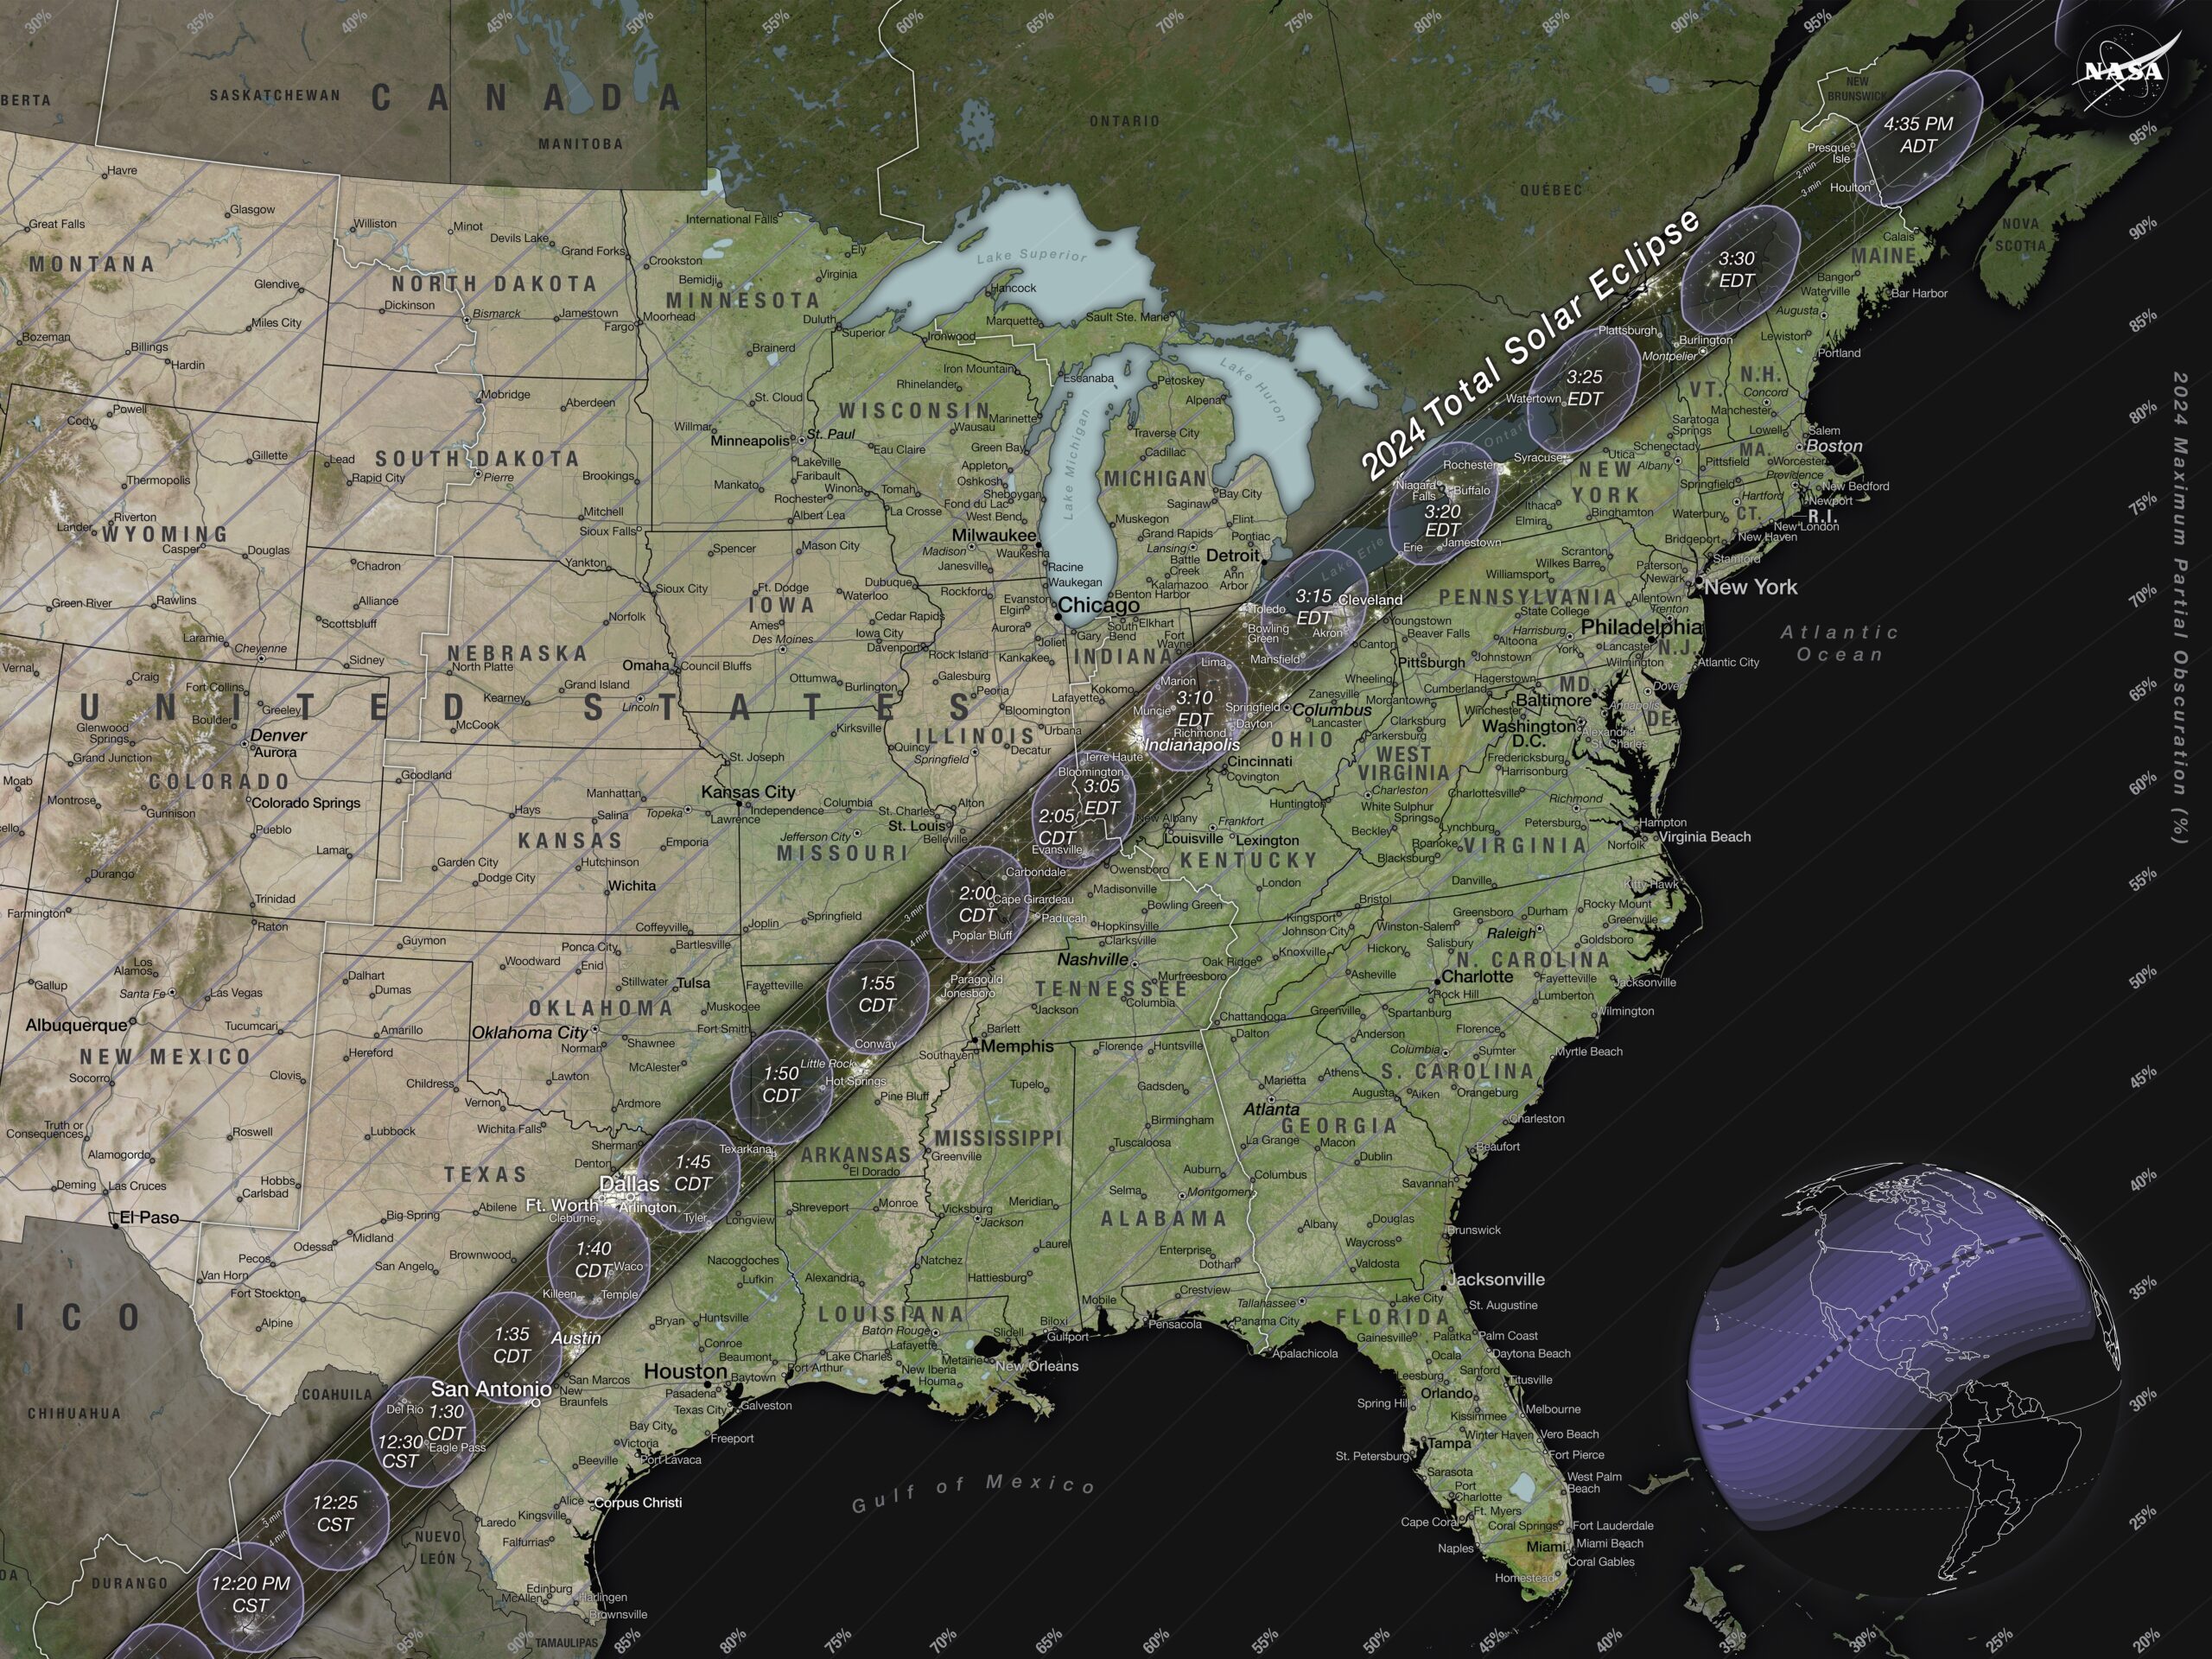 Here’s what time the eclipse will be visible in your region